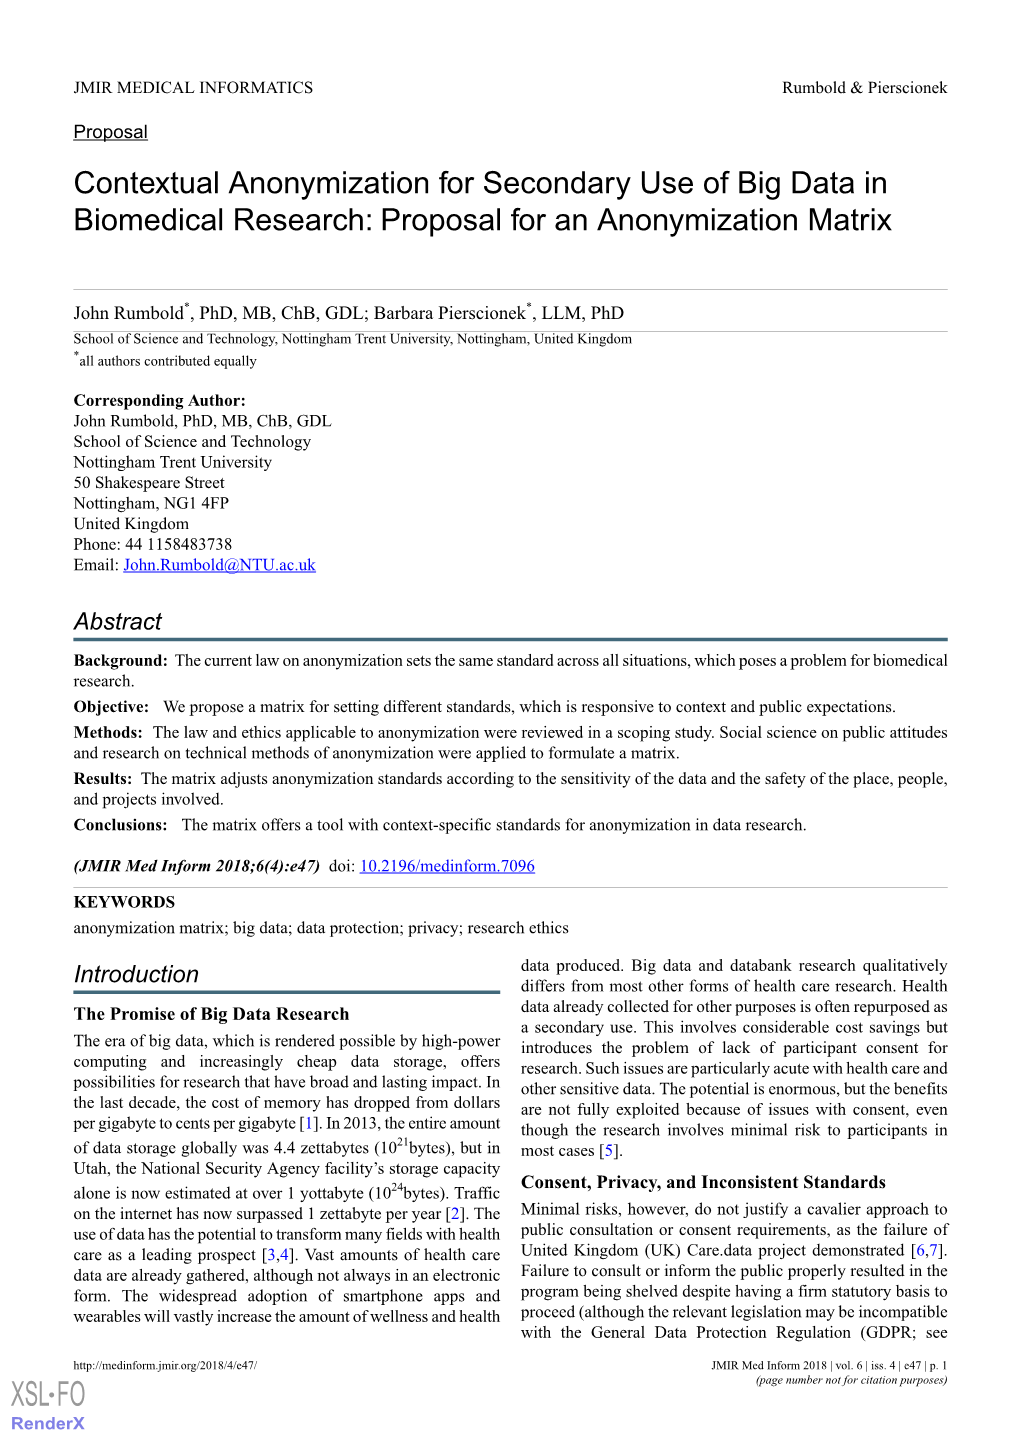 Contextual Anonymization for Secondary Use of Big Data in Biomedical Research: Proposal for an Anonymization Matrix